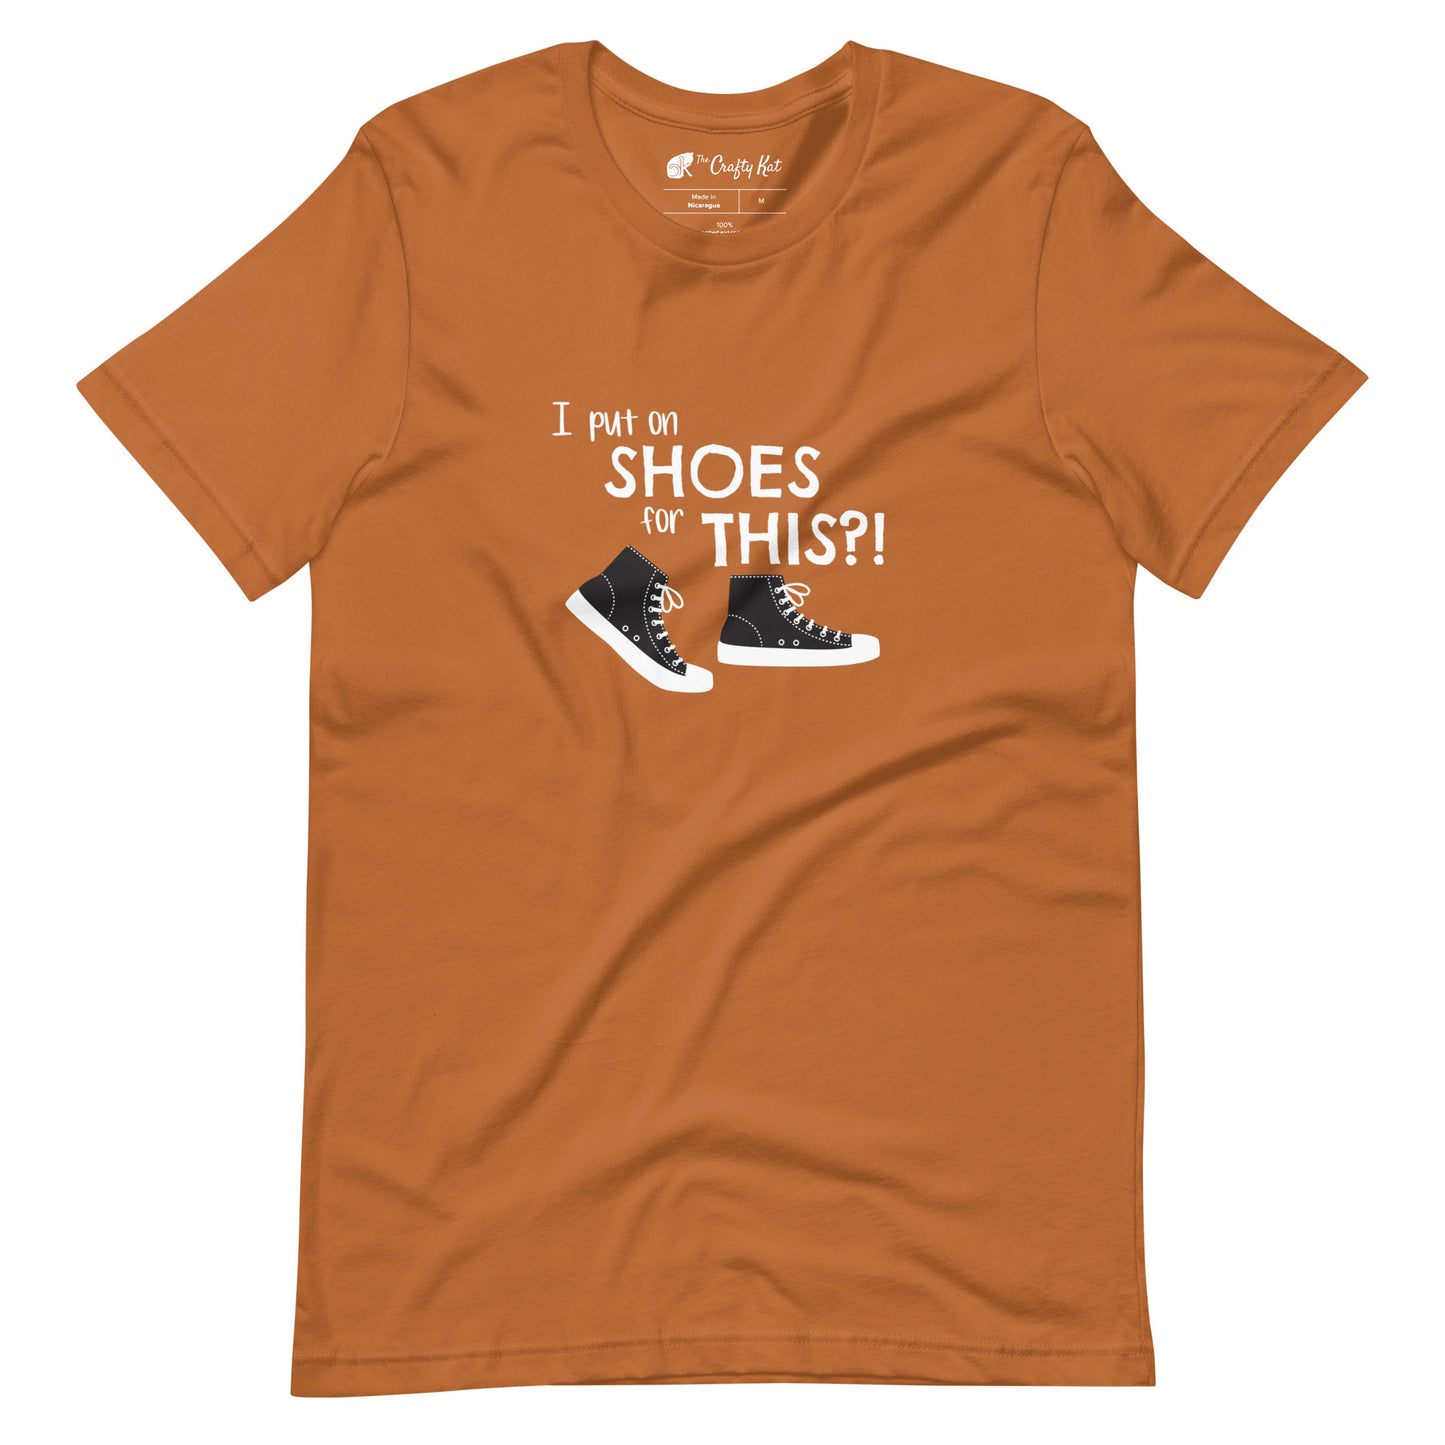 Toast (yellow orange) t-shirt with graphic of black and white canvas "chuck" sneakers and text: "I put on SHOES for THIS?!"